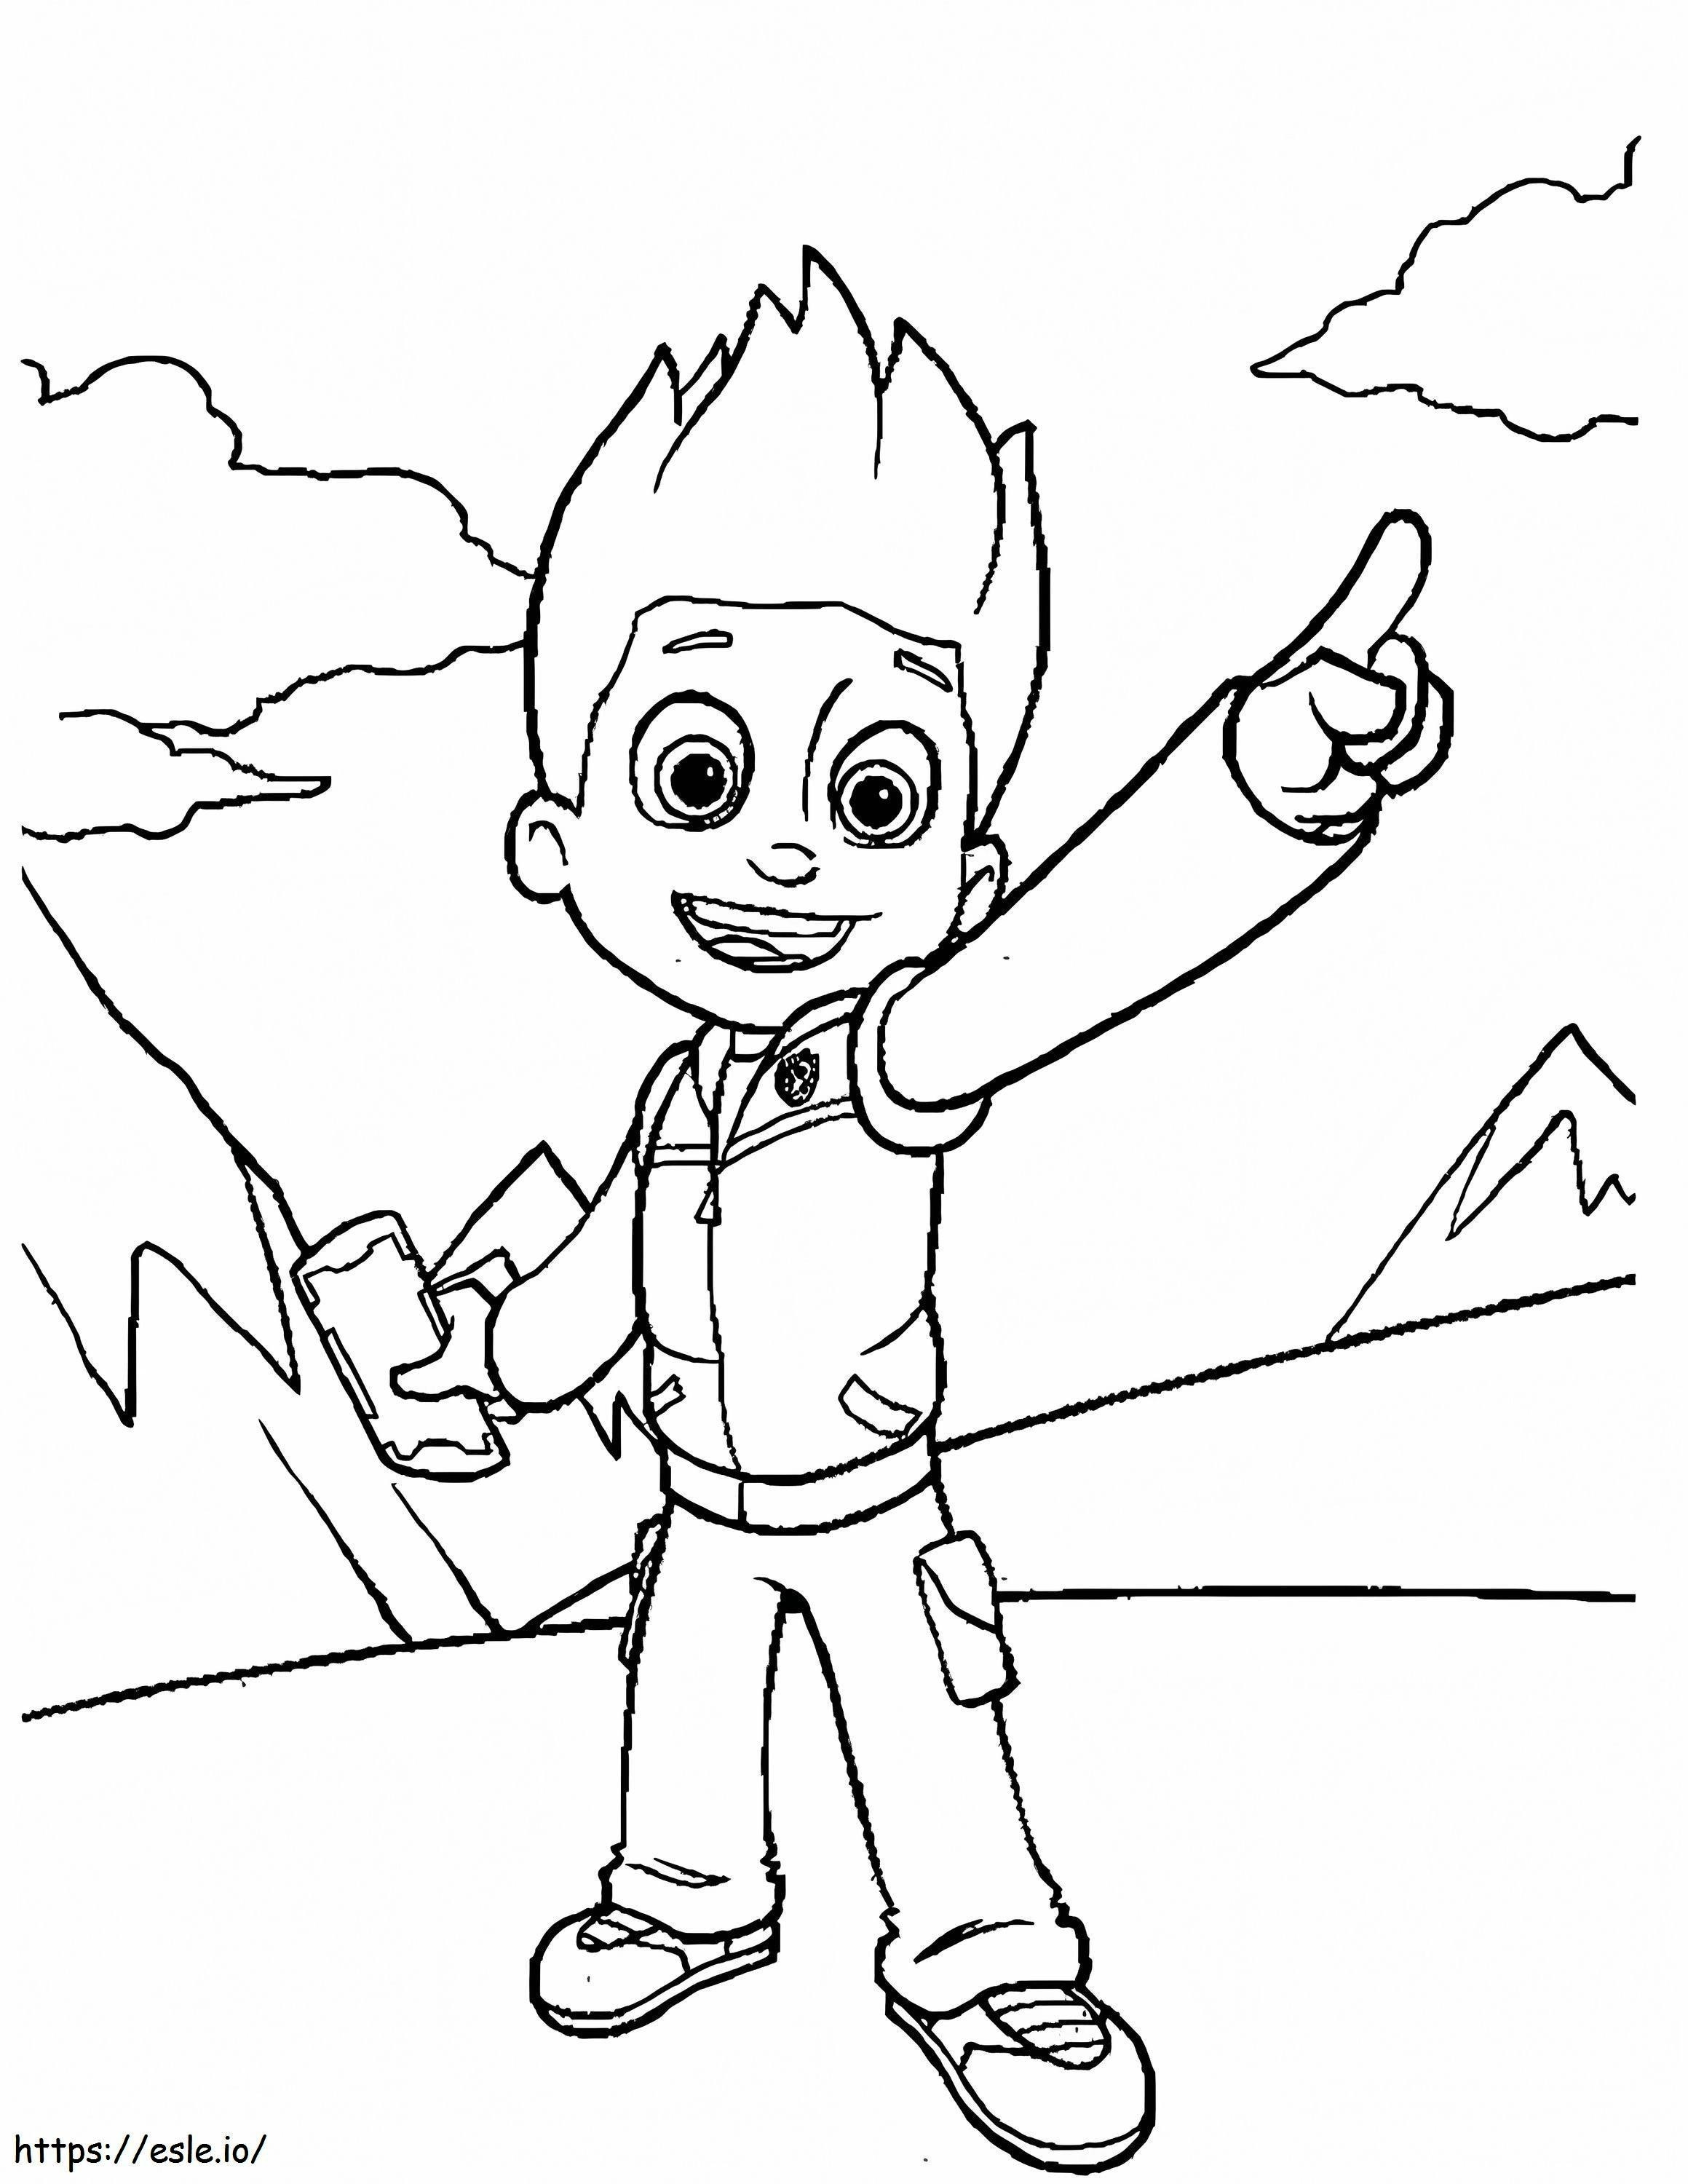 Cute Ryder Paw Patrol coloring page